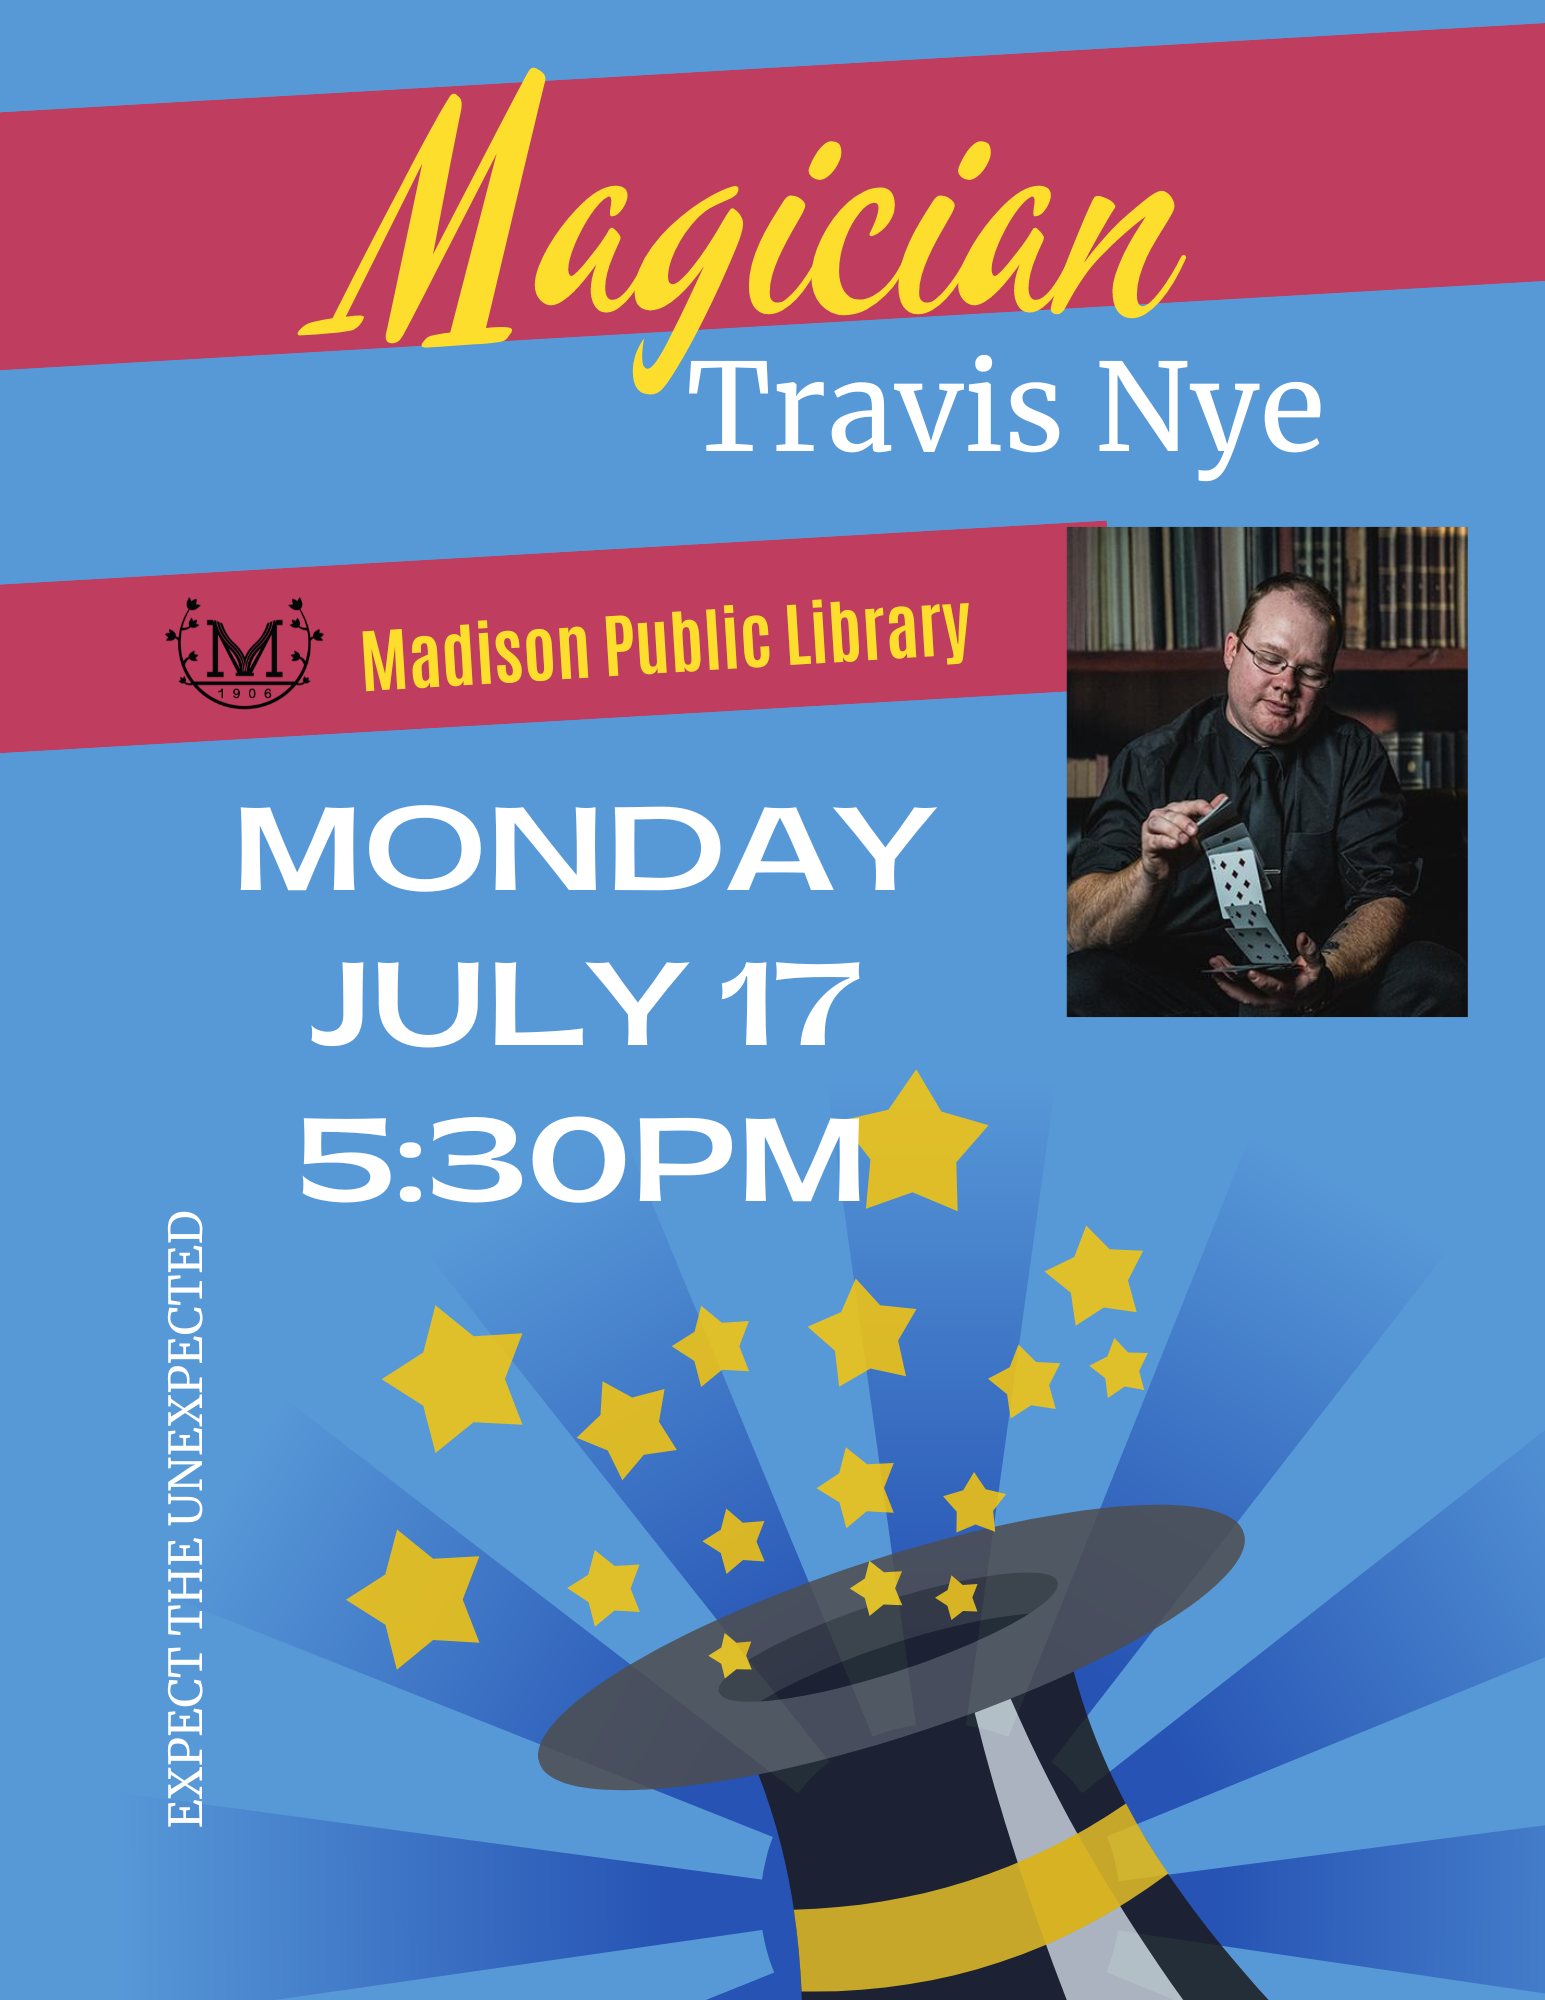 <h1 class="tribe-events-single-event-title">Magician Travis Nye</h1>